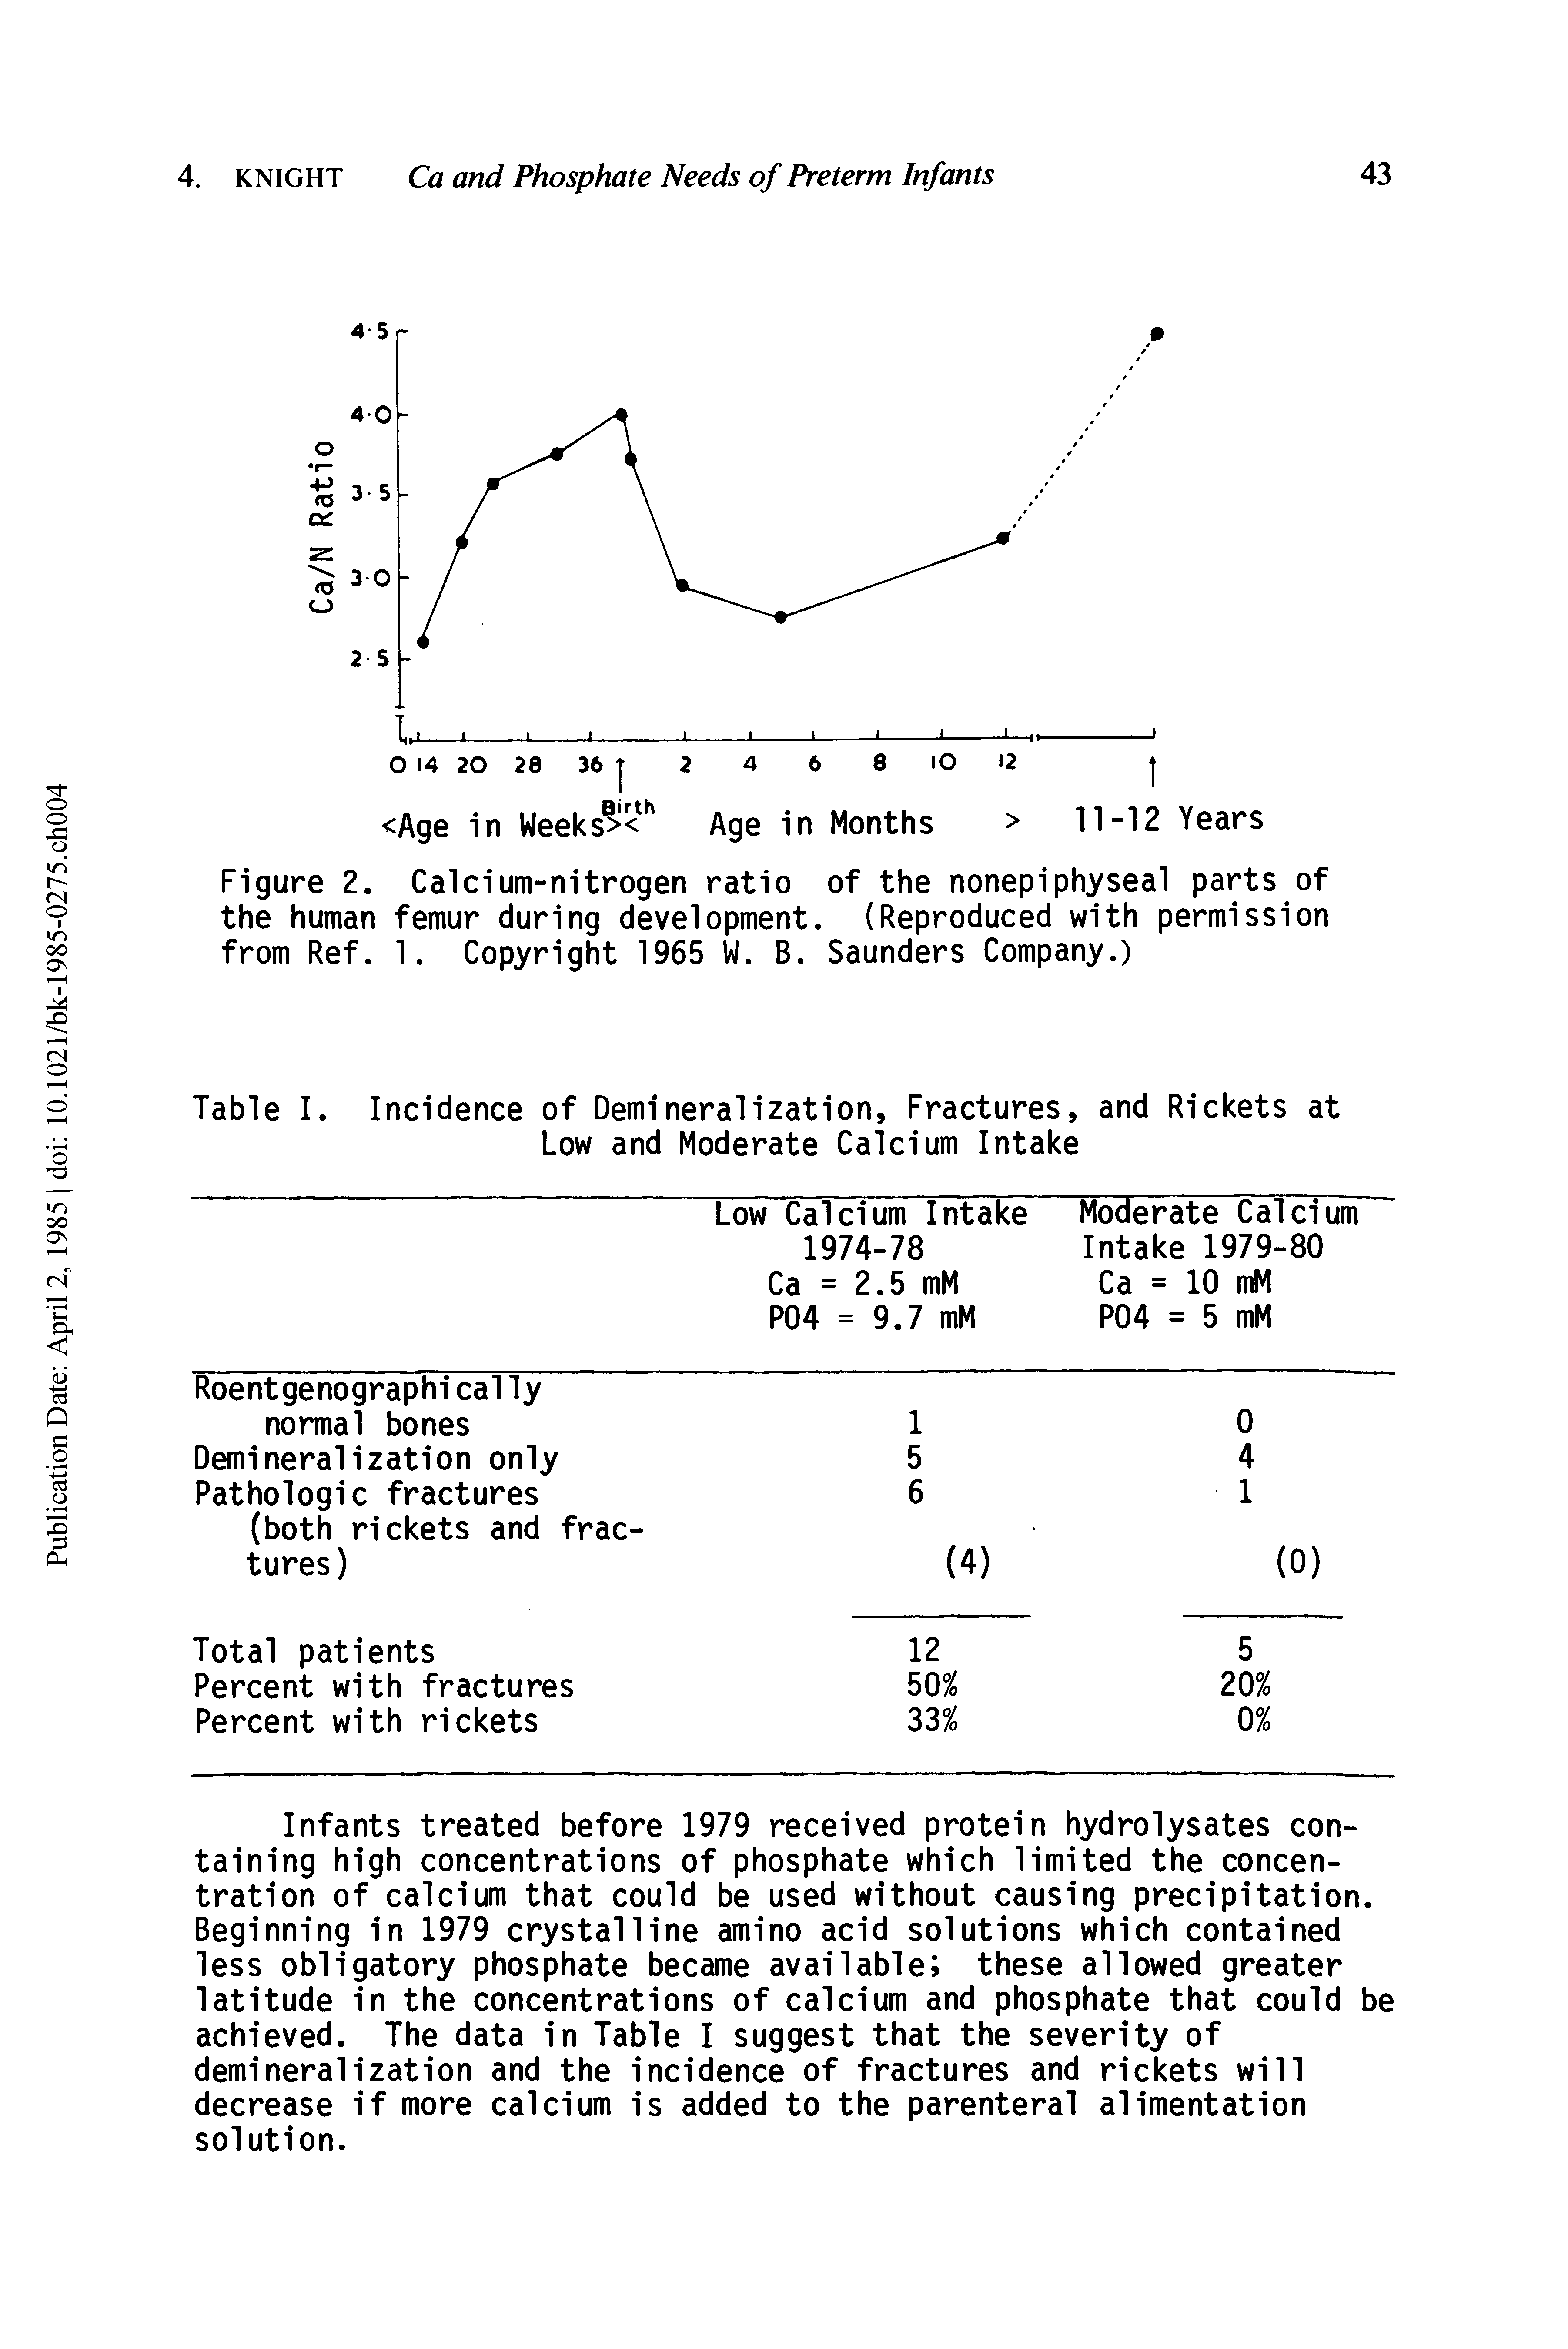 Figure 2. Calcium-nitrogen ratio of the nonepiphyseal parts of the human femur during development. (Reproduced with permission from Ref. 1. Copyright 1965 W. B. Saunders Company.)...